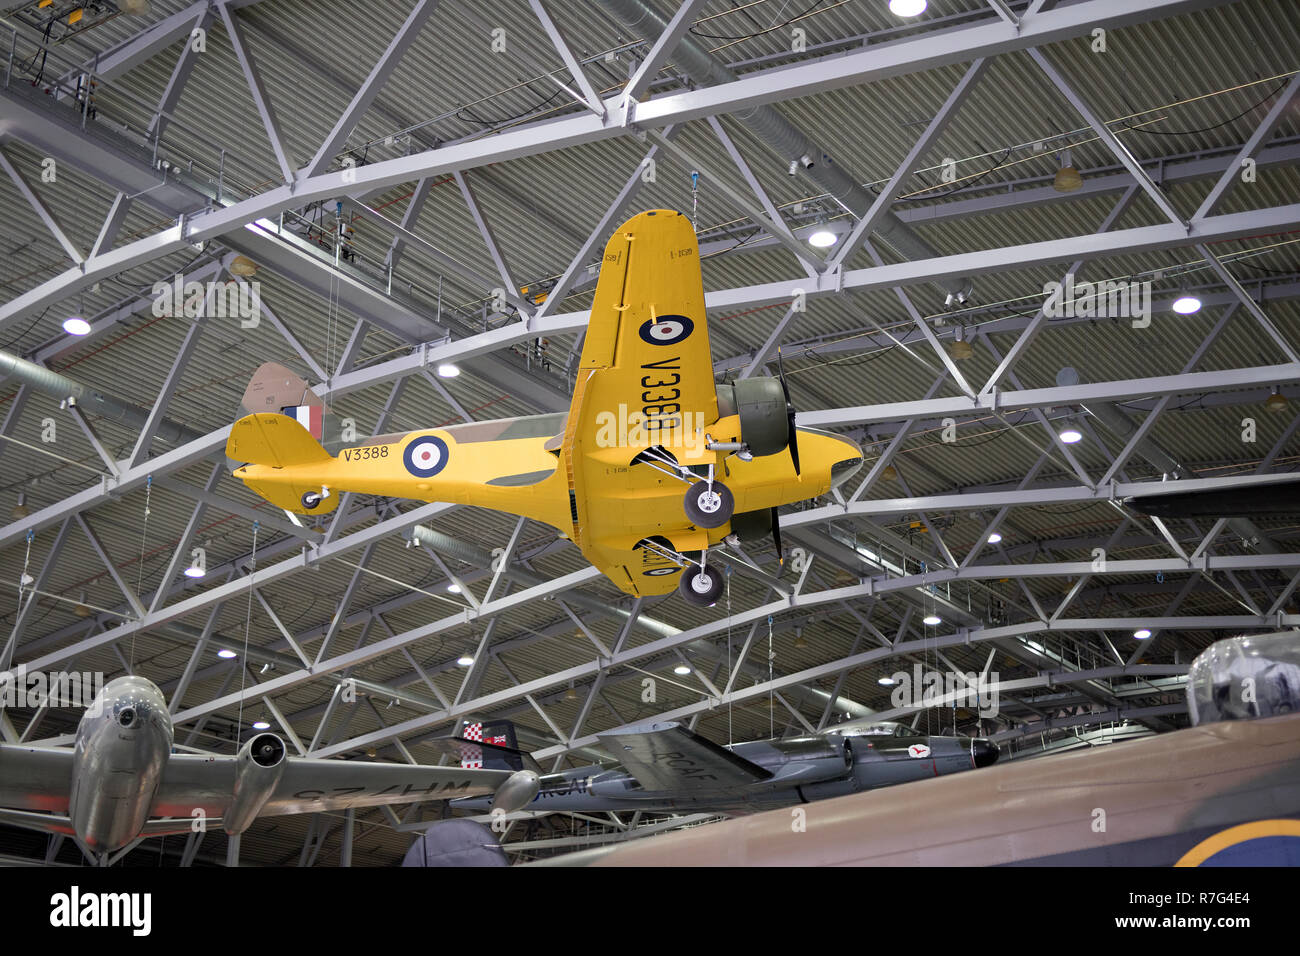 Airspeed Oxford AS 40 mk1 aircraft at Duxford Imperial Air museum,Duxford, Cambridgeshire,uk Stock Photo